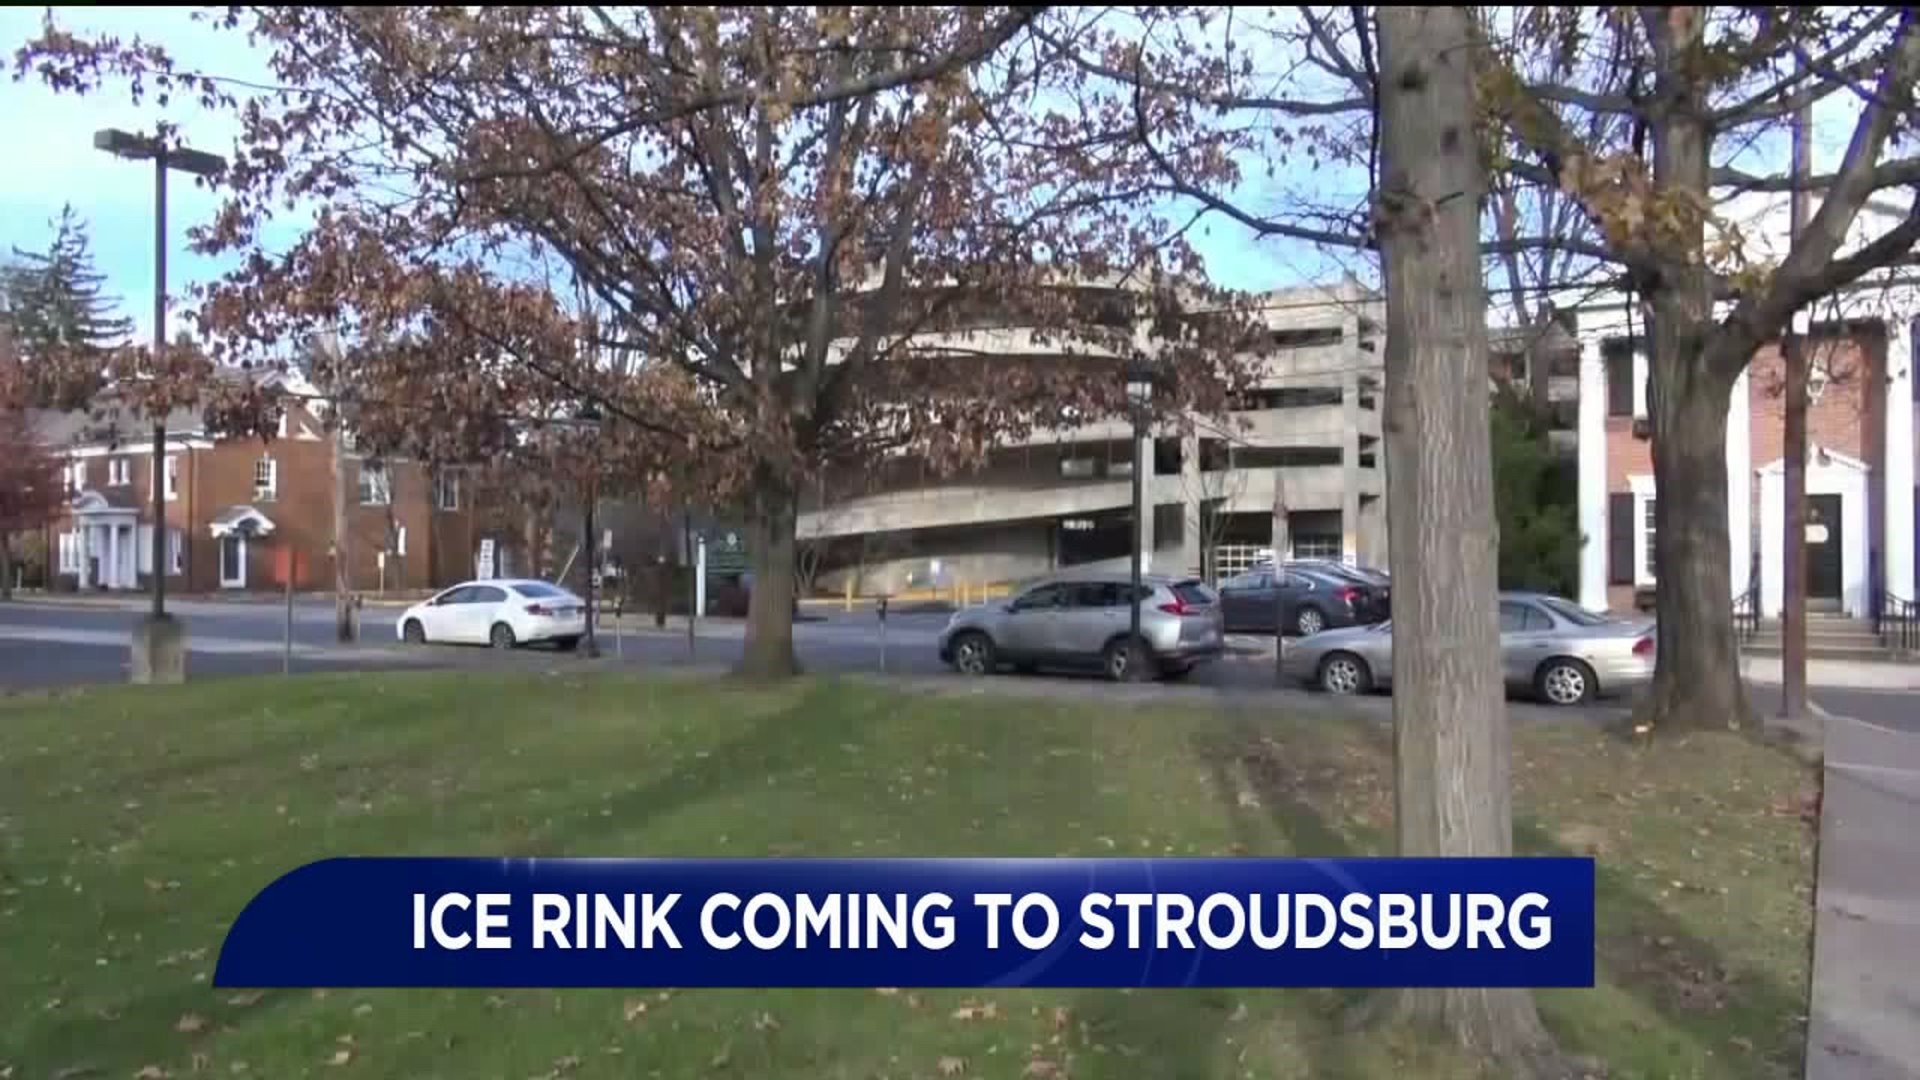 Ice Rink Coming to Stroudsburg